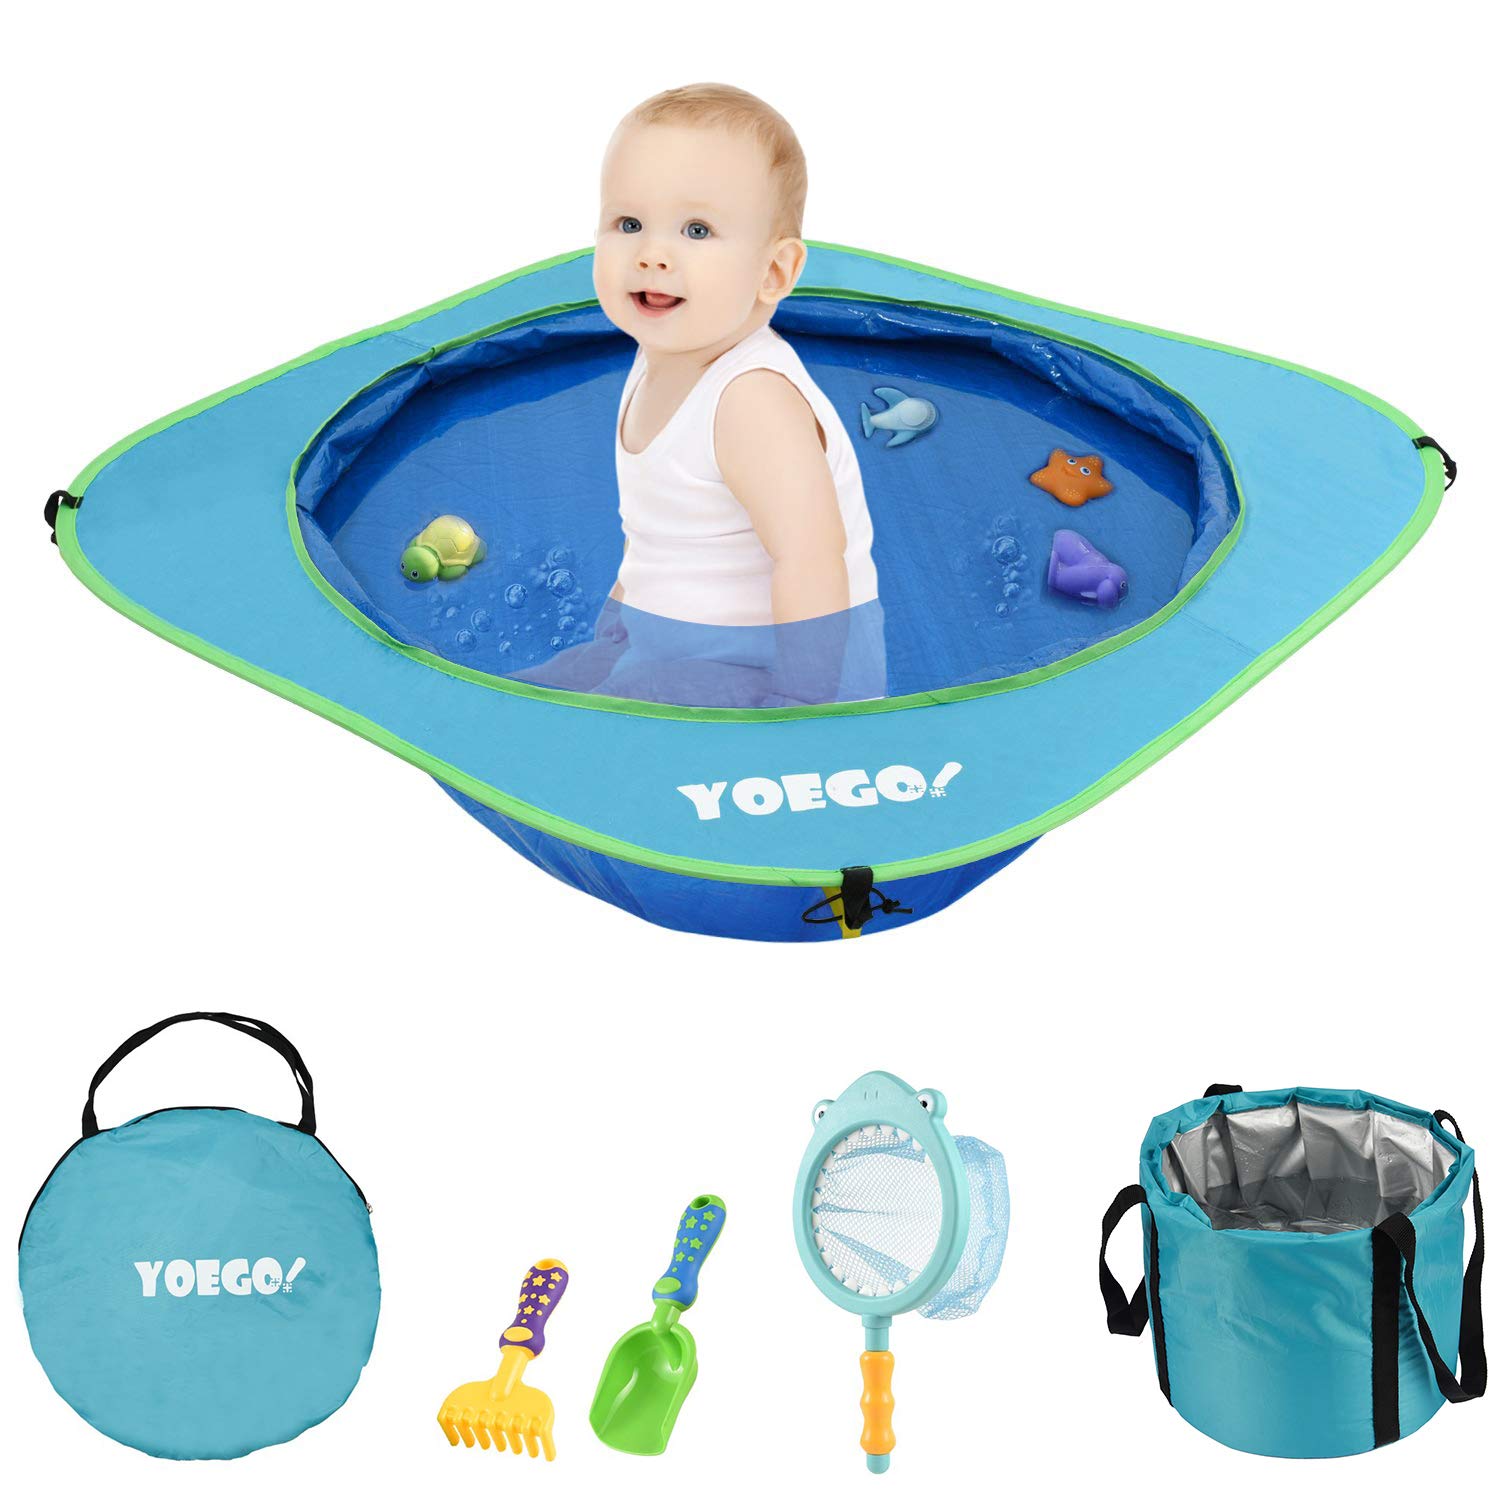 Yoego Kiddie Pool, Portable Baby Beach Swimming Pool, Toddler Pool with Baby Sand Toys Including Fish Net and Toy Fishes, Sand Shovel and Rake, Perfect for Babies Toddlers On The Beach and Indoors